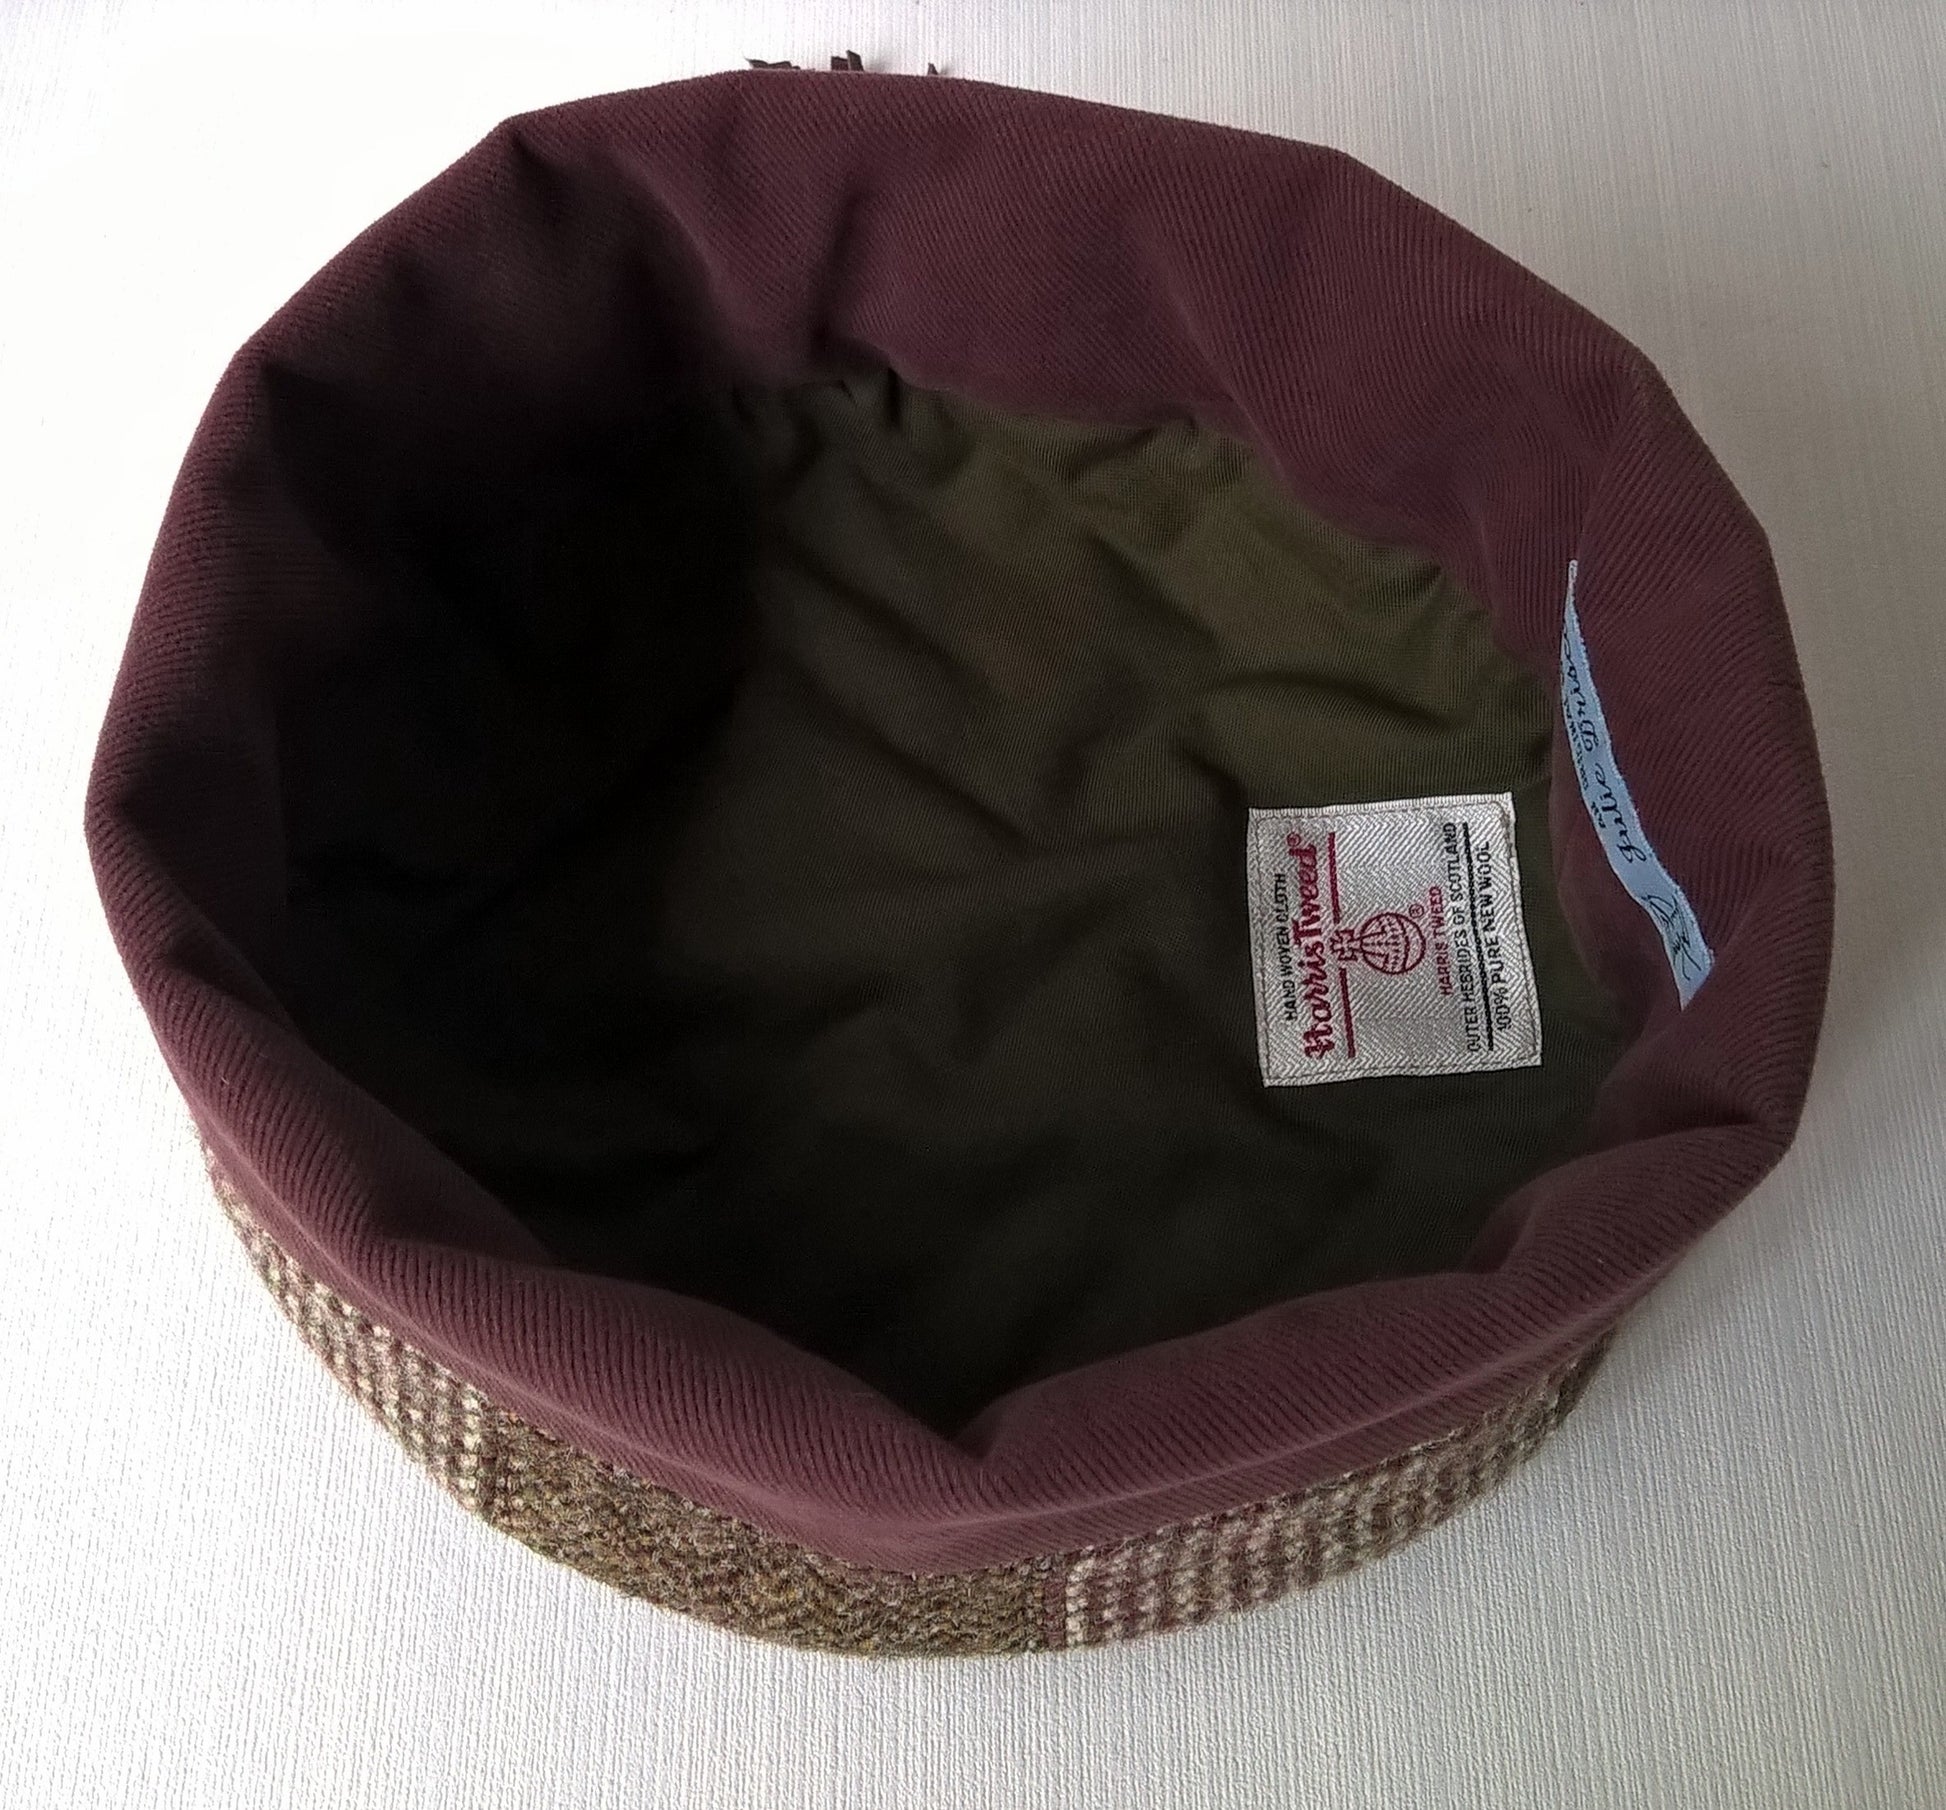 Harris Tweed hat with cotton lining for comfortable wear